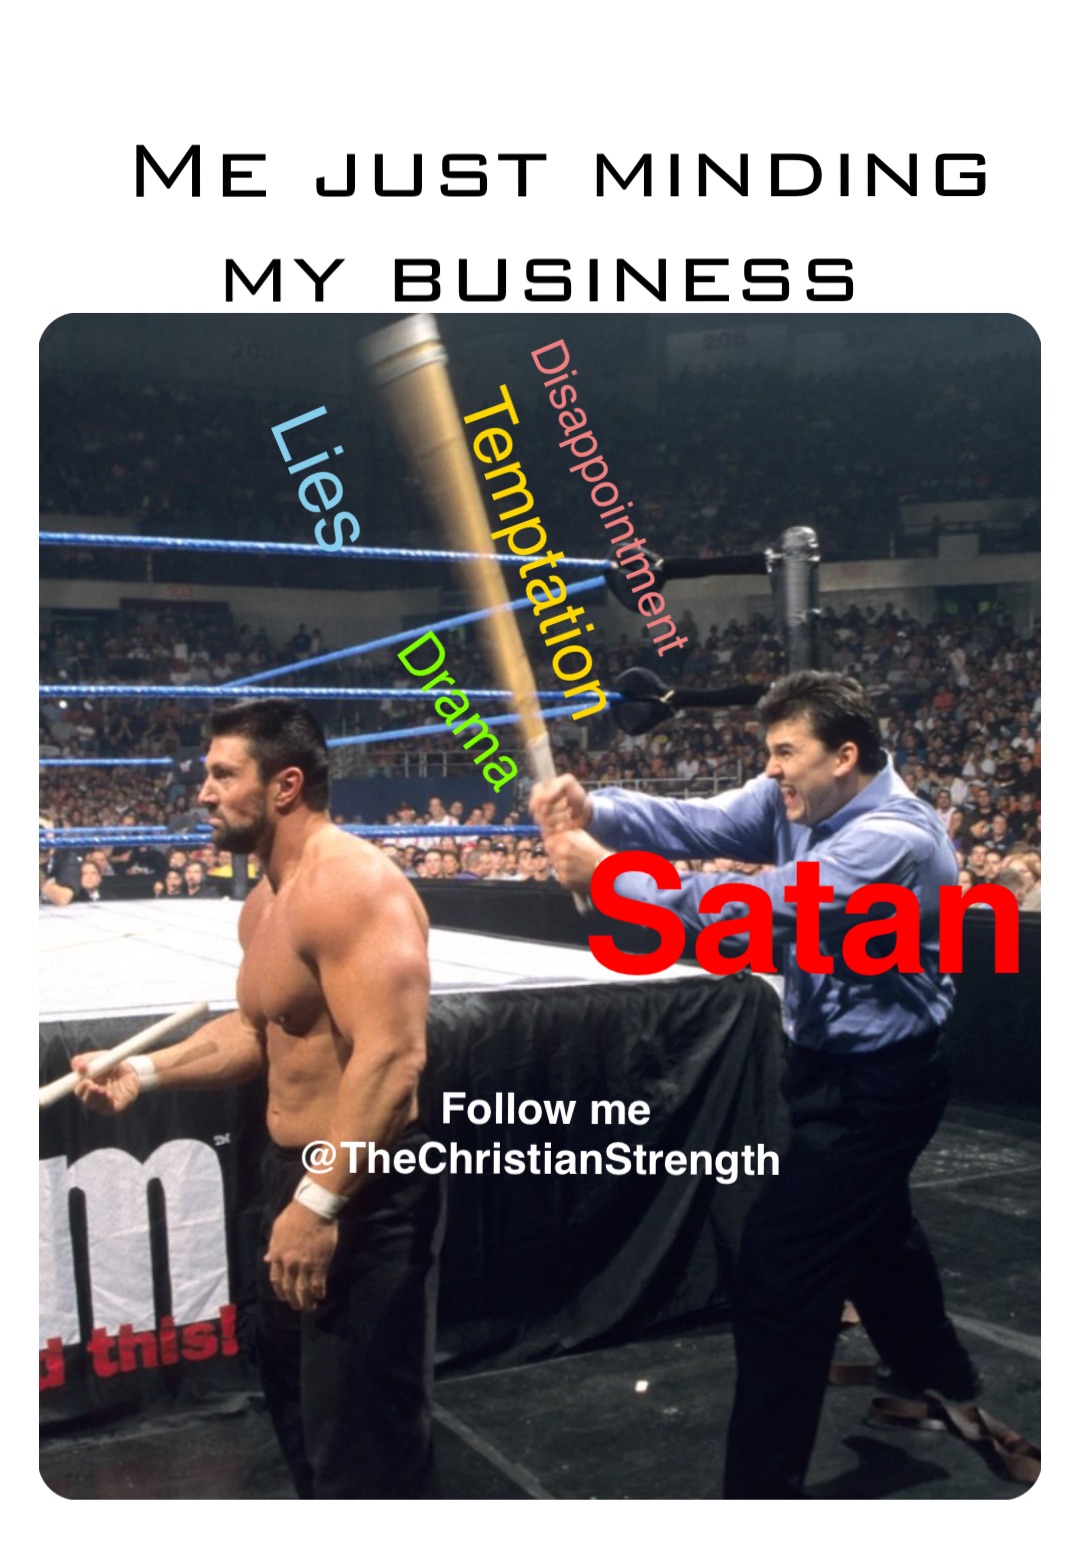 Me just minding my business Satan Temptation Follow me @TheChristianStrength Drama Disappointment Lies